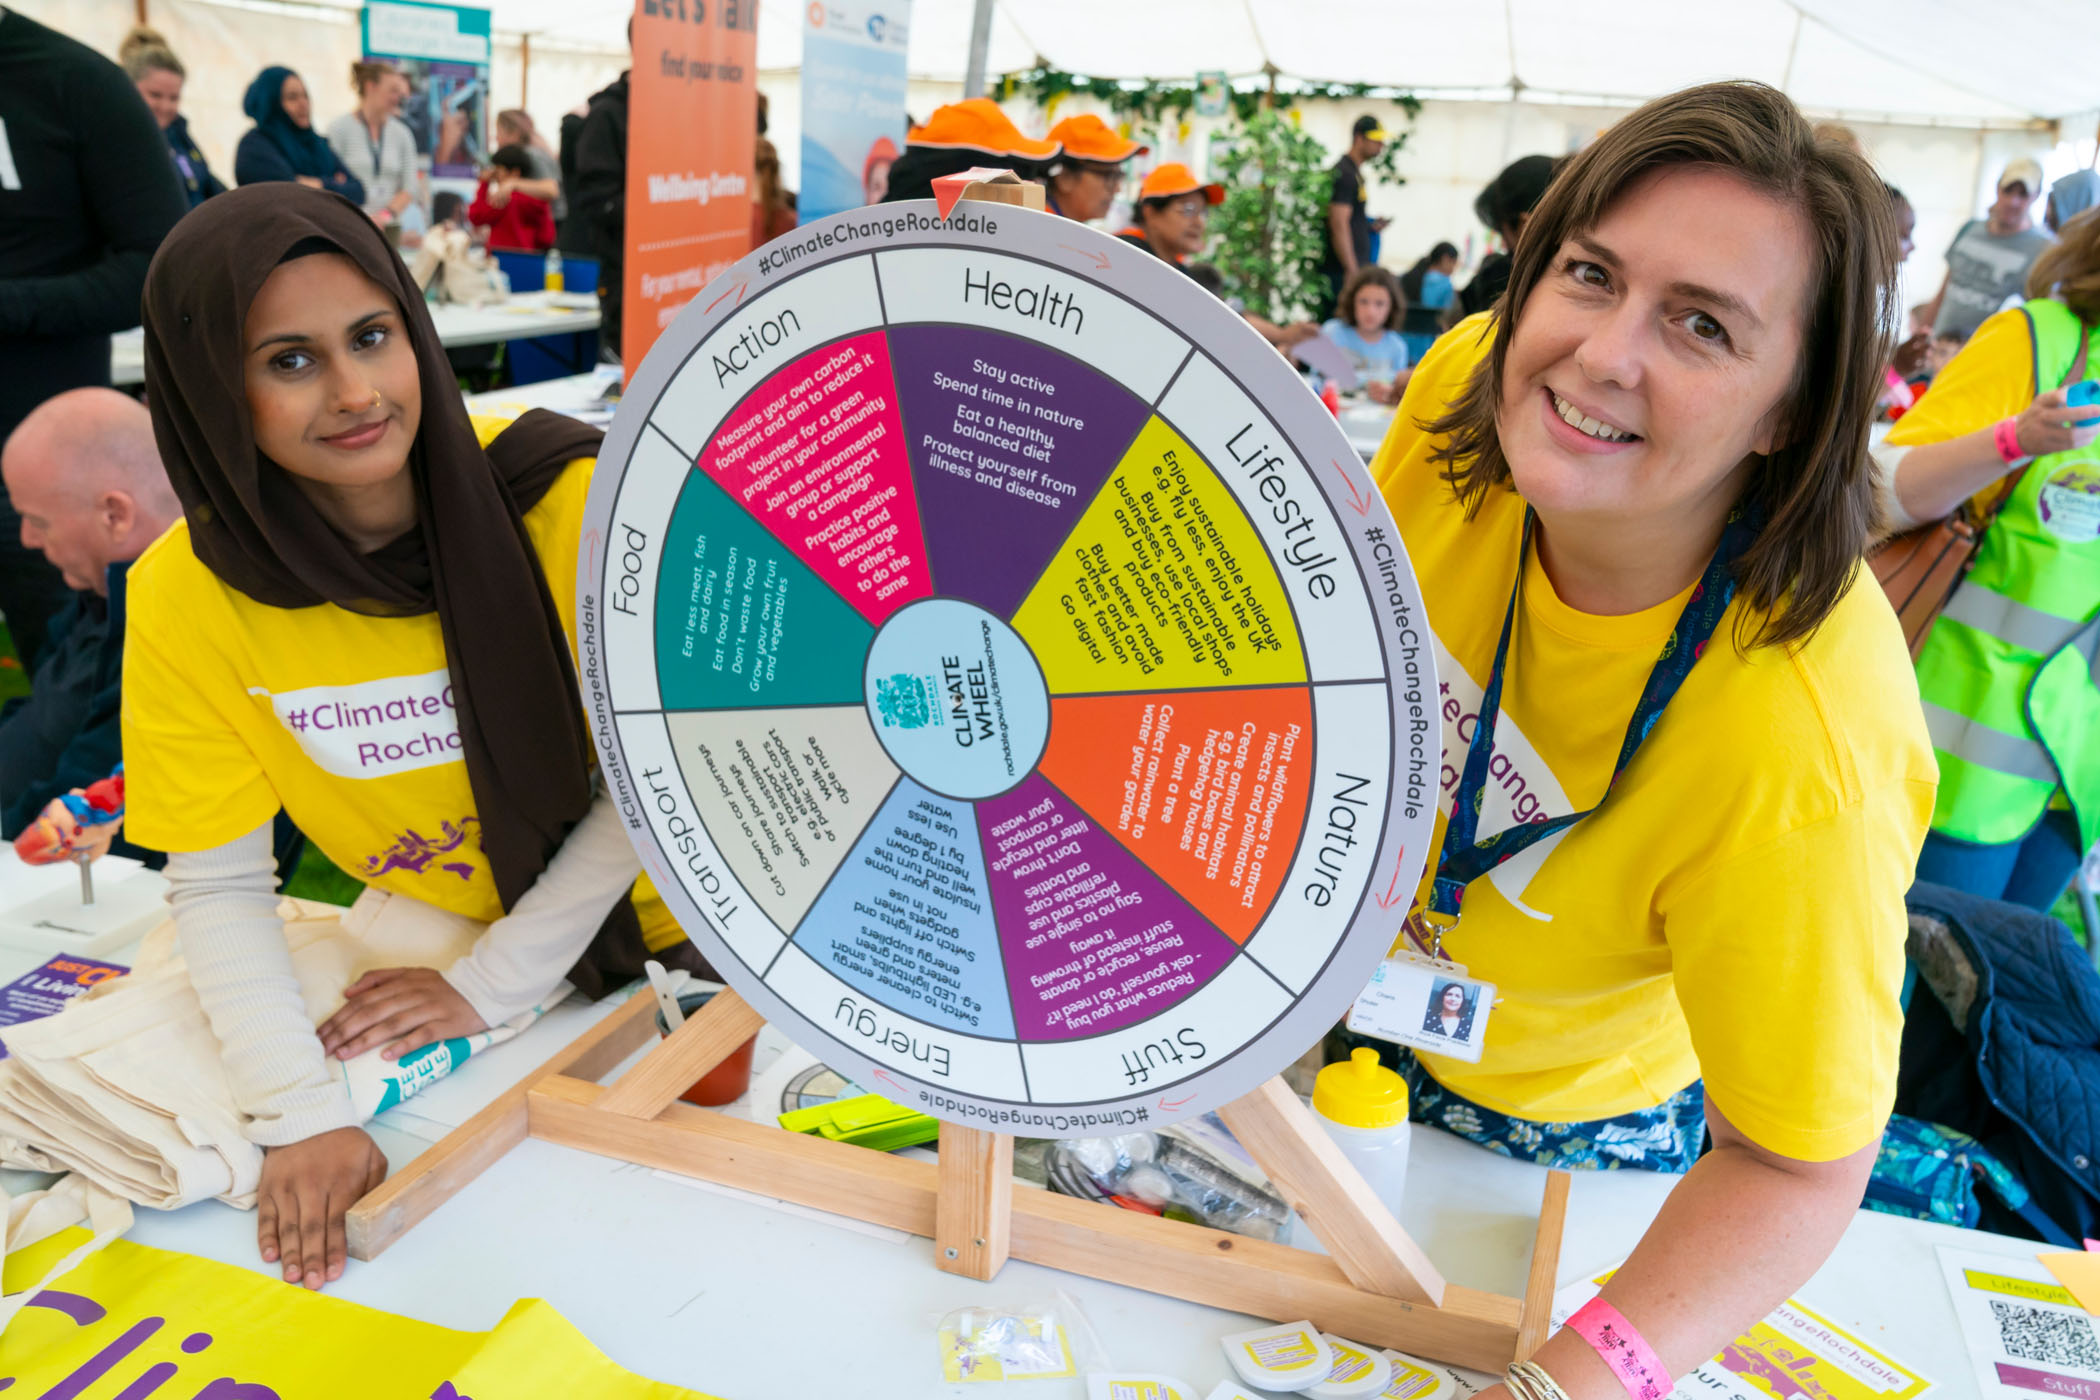 Two members of the #ClimateChangeRochdale team smile at at event alongside a wheel that can be spun to choose from suggested climate actions we can all take